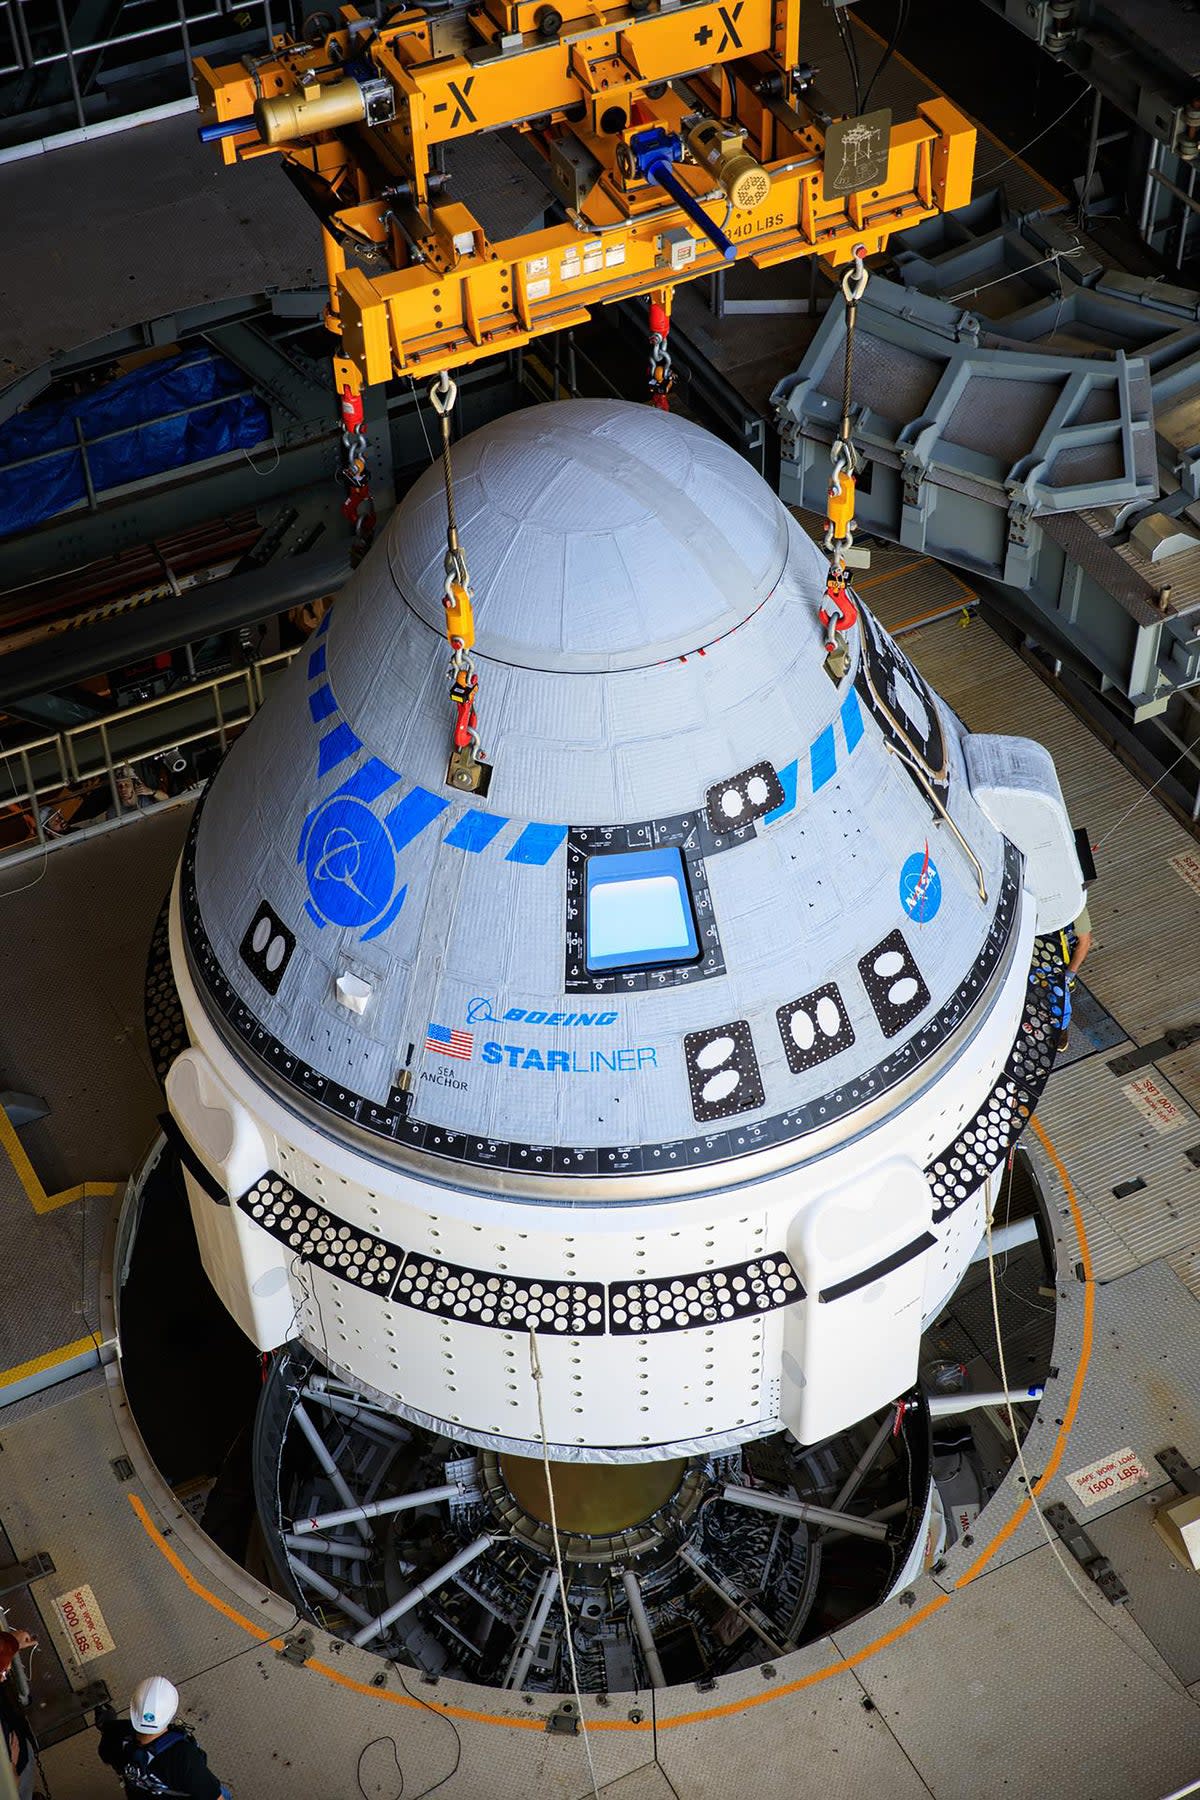 The Boeing CST-100 Starliner spacecraft being lifted at the Vertical Integration Facility in Florida's Cape Canaveral Space Force Station. (PA)